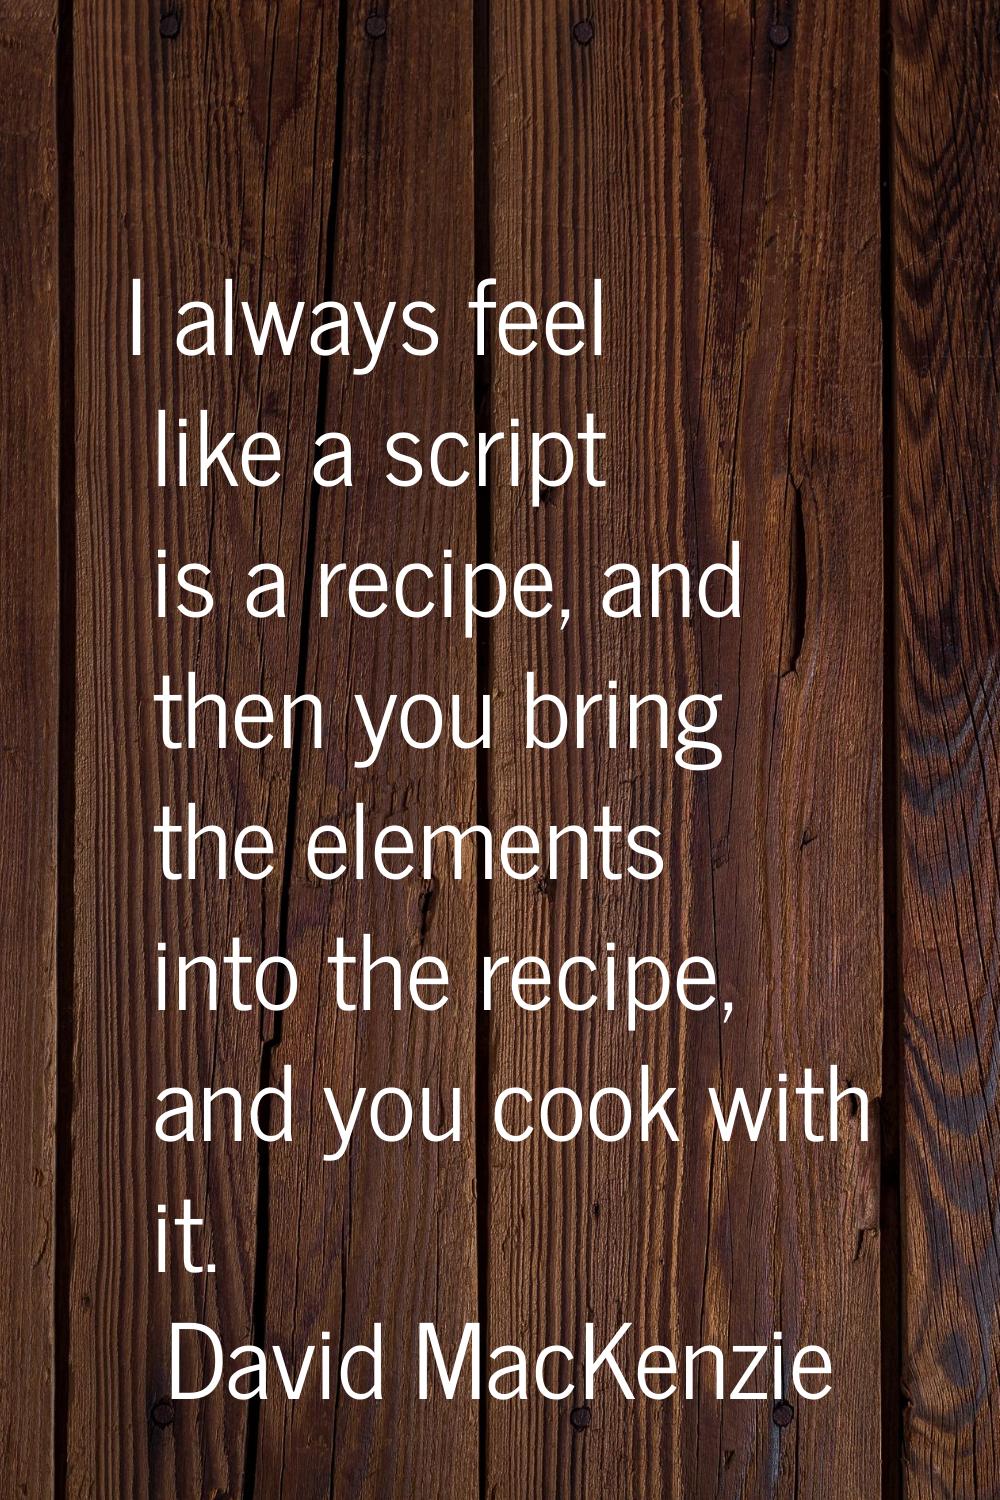 I always feel like a script is a recipe, and then you bring the elements into the recipe, and you c